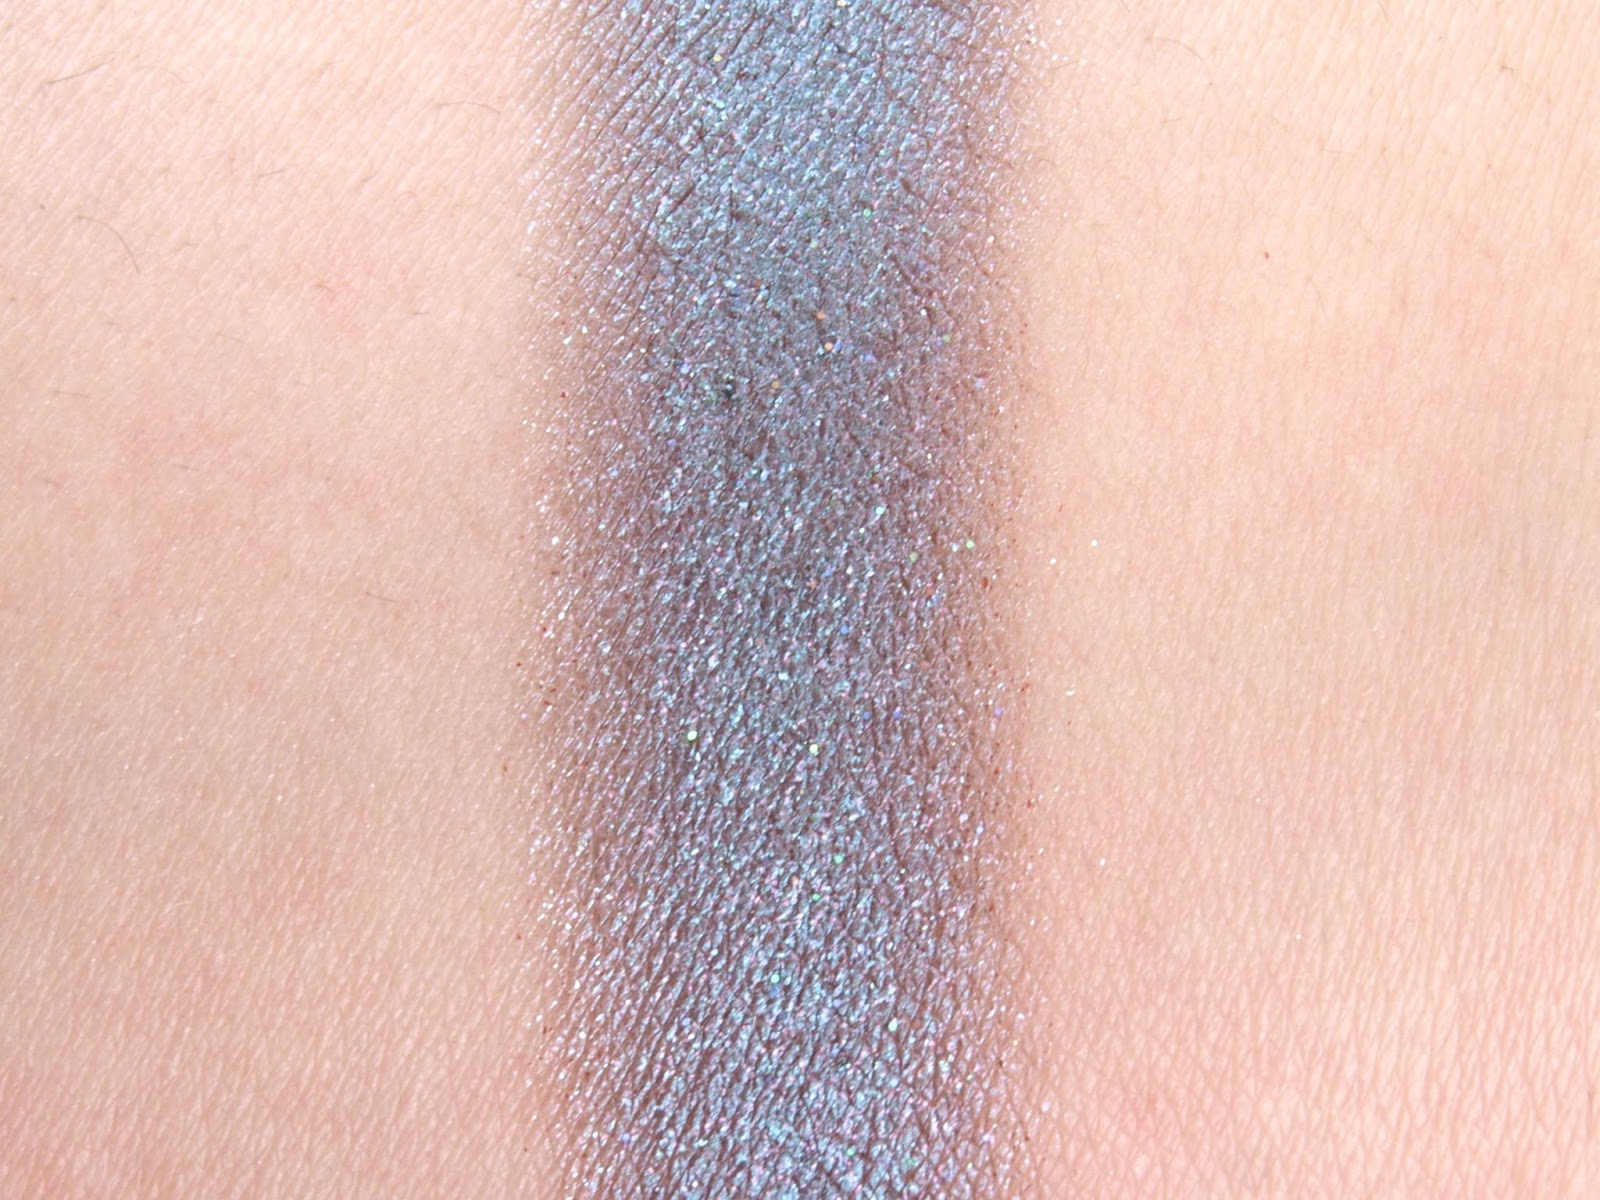 Sephora Colorful Duo Reflects Long Lasting Eyeshadow in "112 Mermaid Tail": Review and Swatches